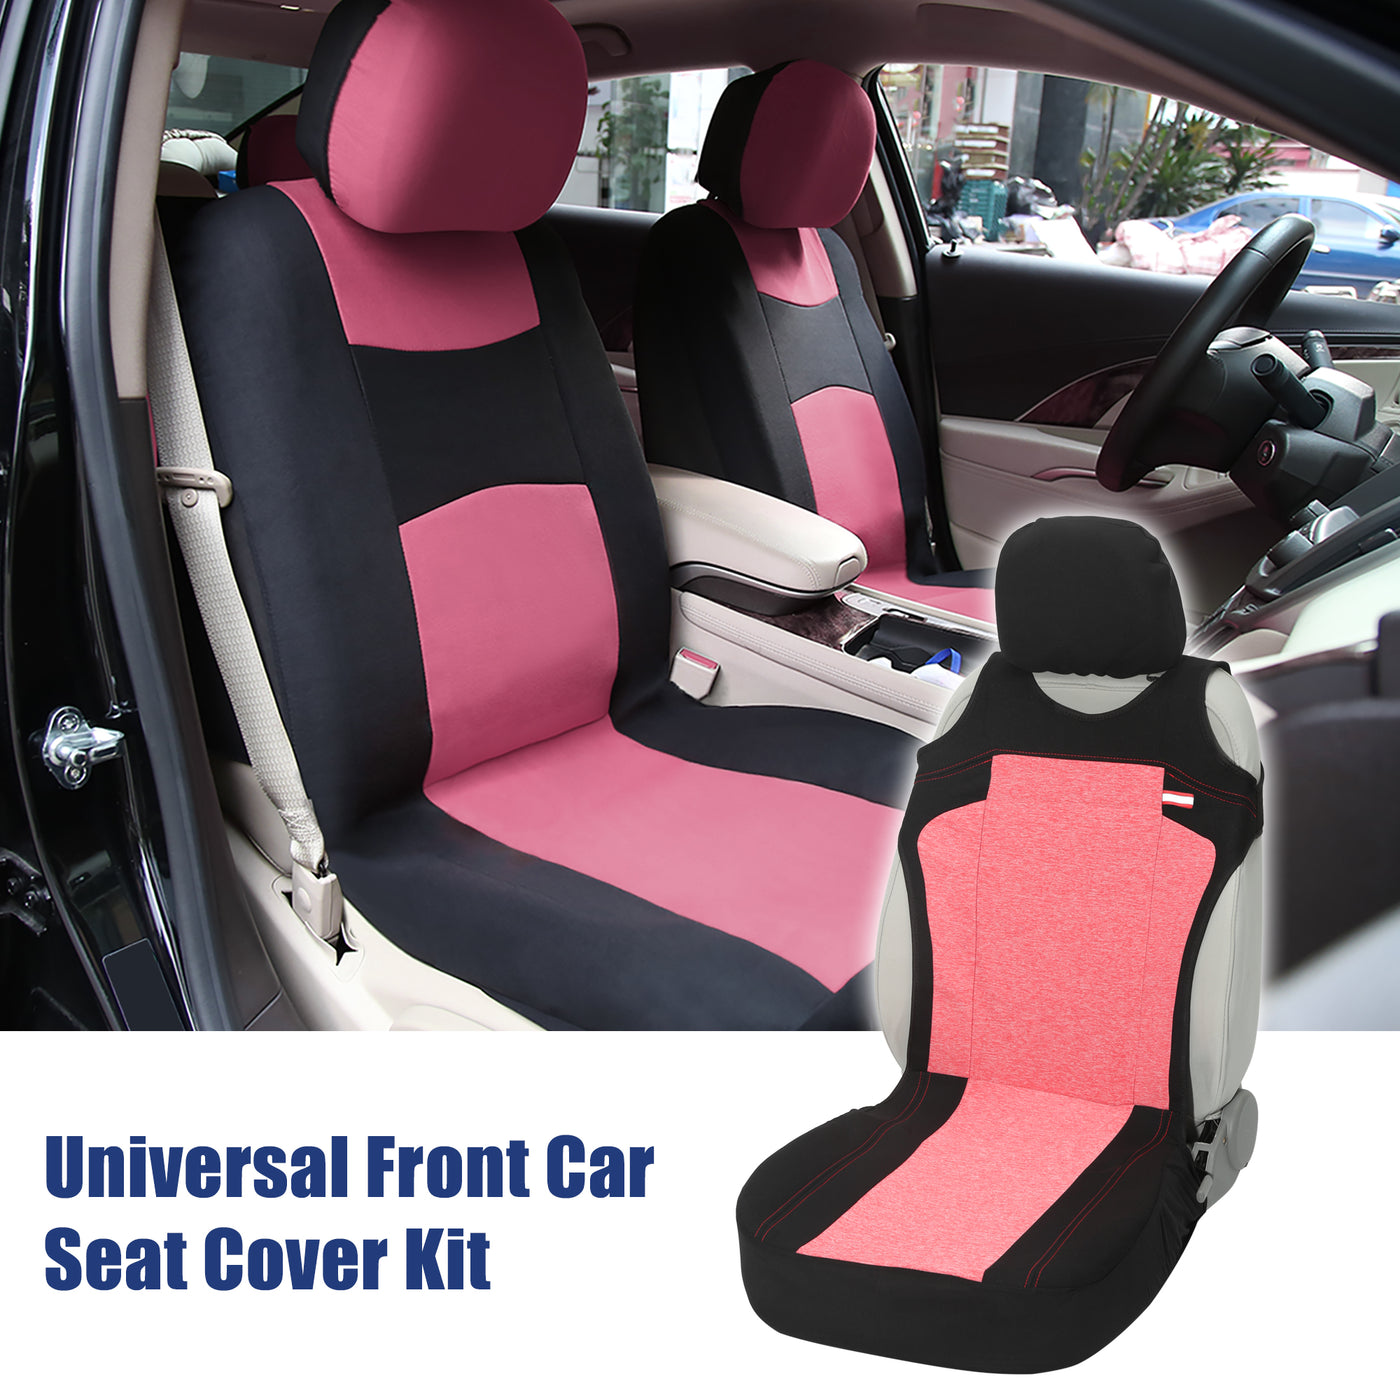 X AUTOHAUX Universal Front Car Seat Cover Kit Cloth Fabric Seat Protector Pad Fit for Car Truck SUV Red